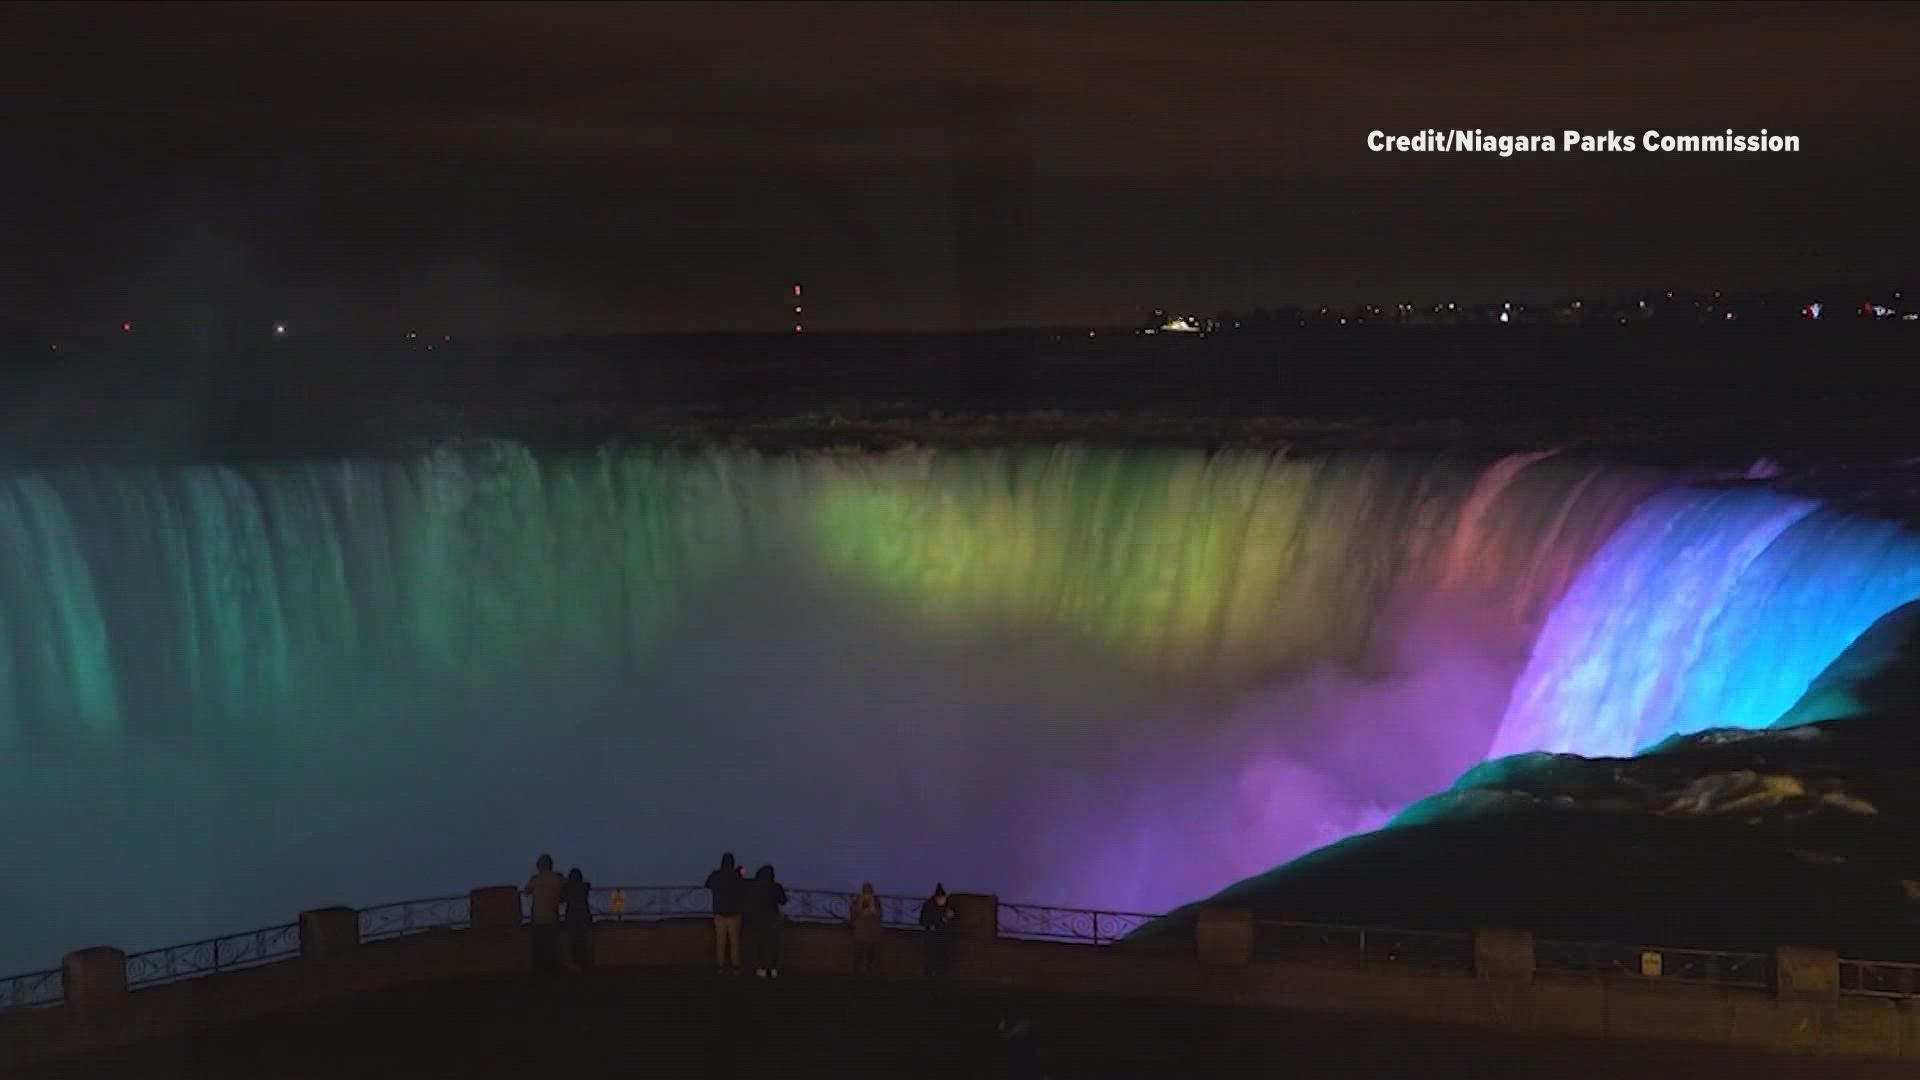 Daybreak's Pete Gallivan takes us back to the royal beginnings of the lighting of the falls.